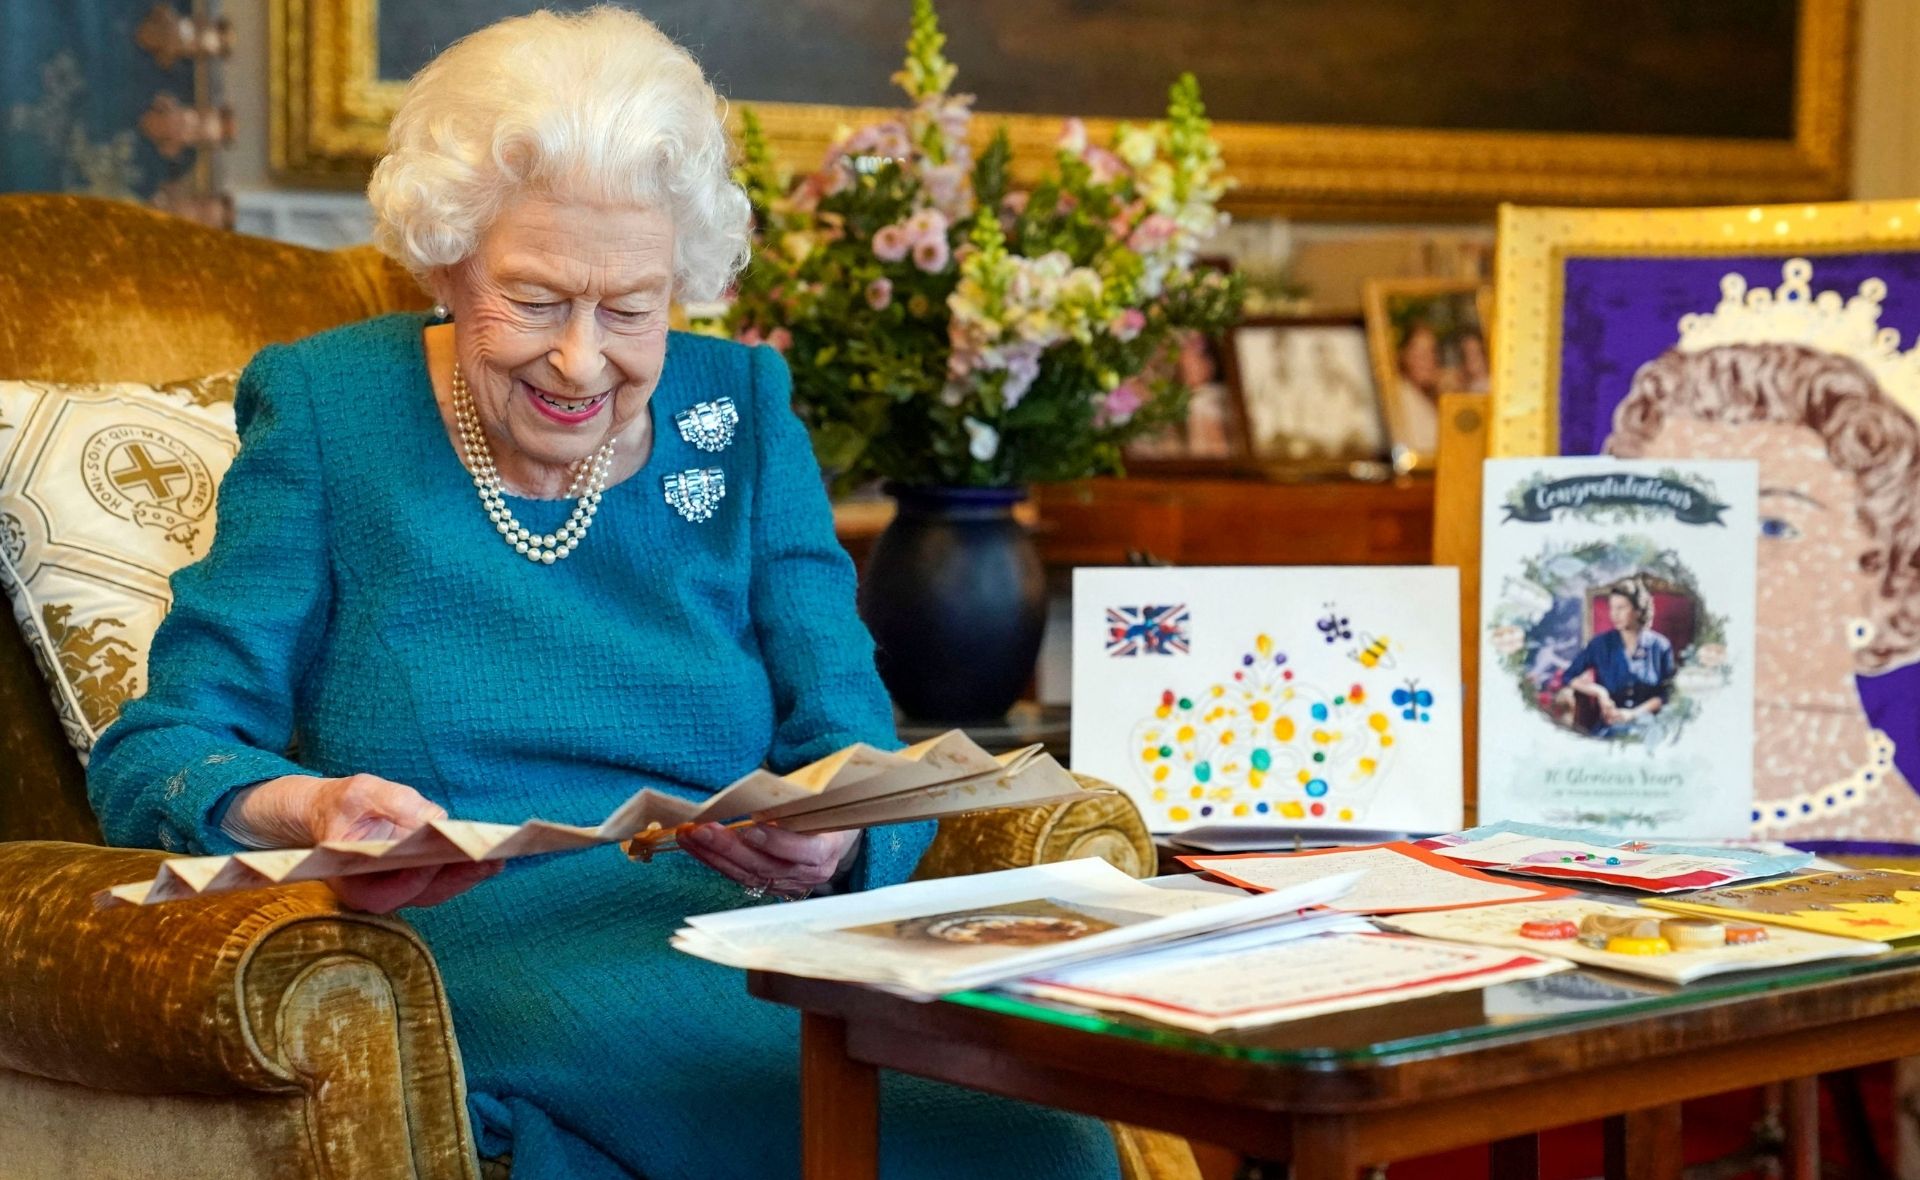 Mark the Queen’s historic Platinum Jubilee with special memorabilia that can be handed down through generations